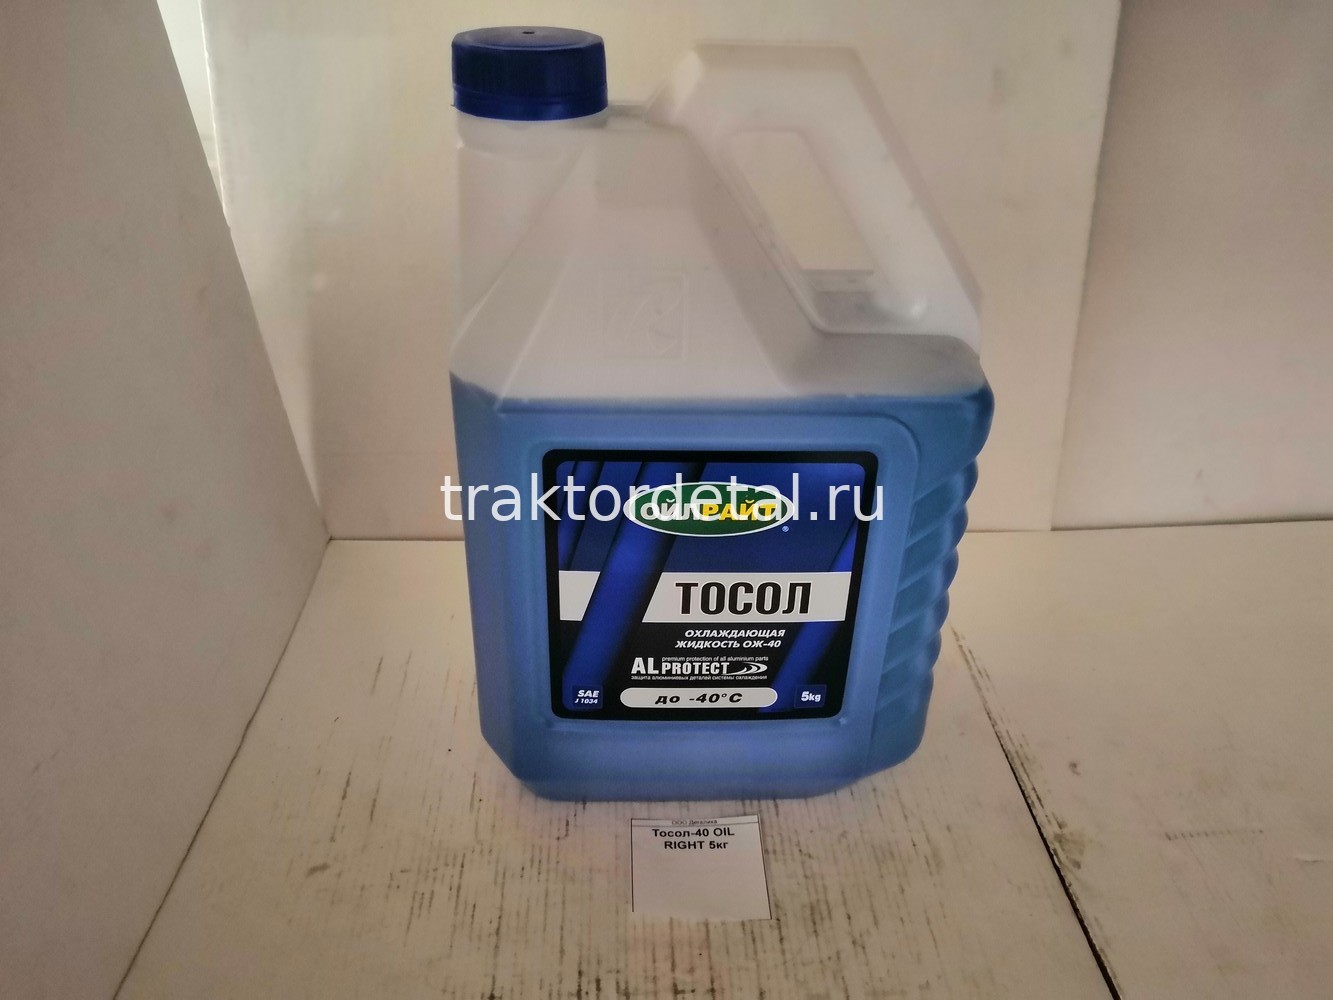 Тосол-40 OIL RIGHT 5кг